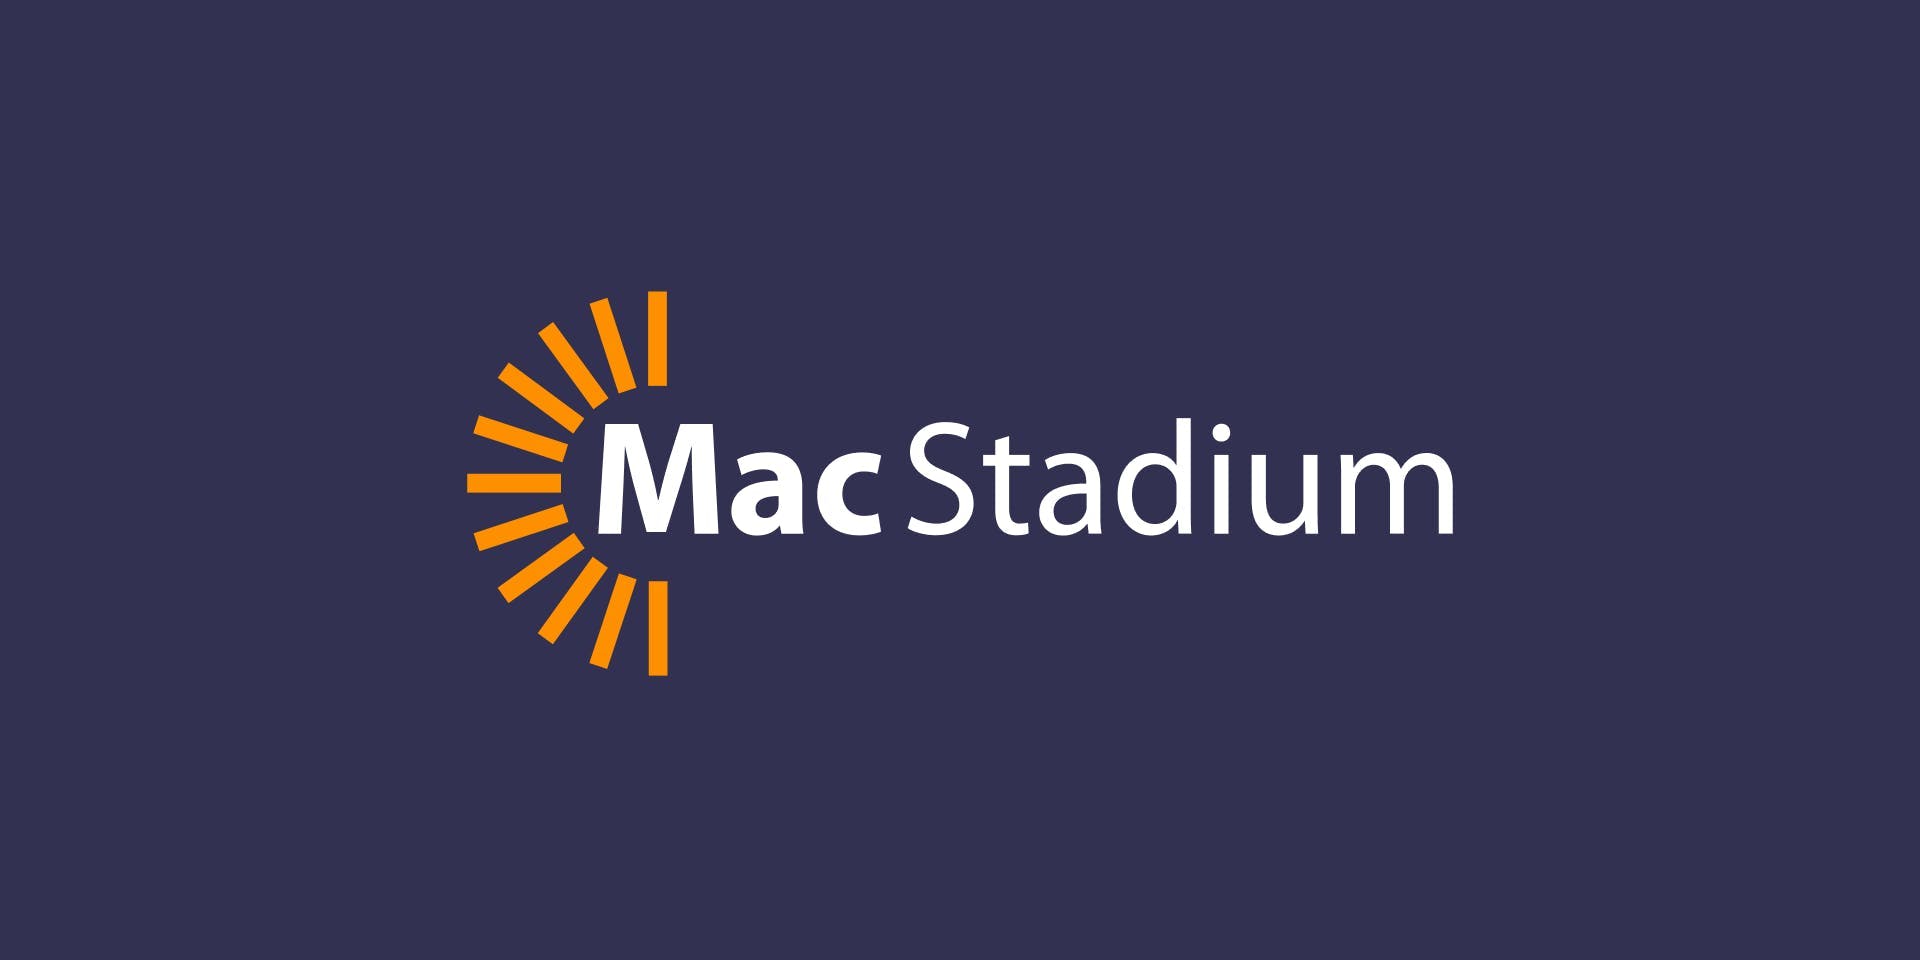 MacStadium Appoints Company Veteran Tom Schnell to Senior Vice President and Chief Customer Officer